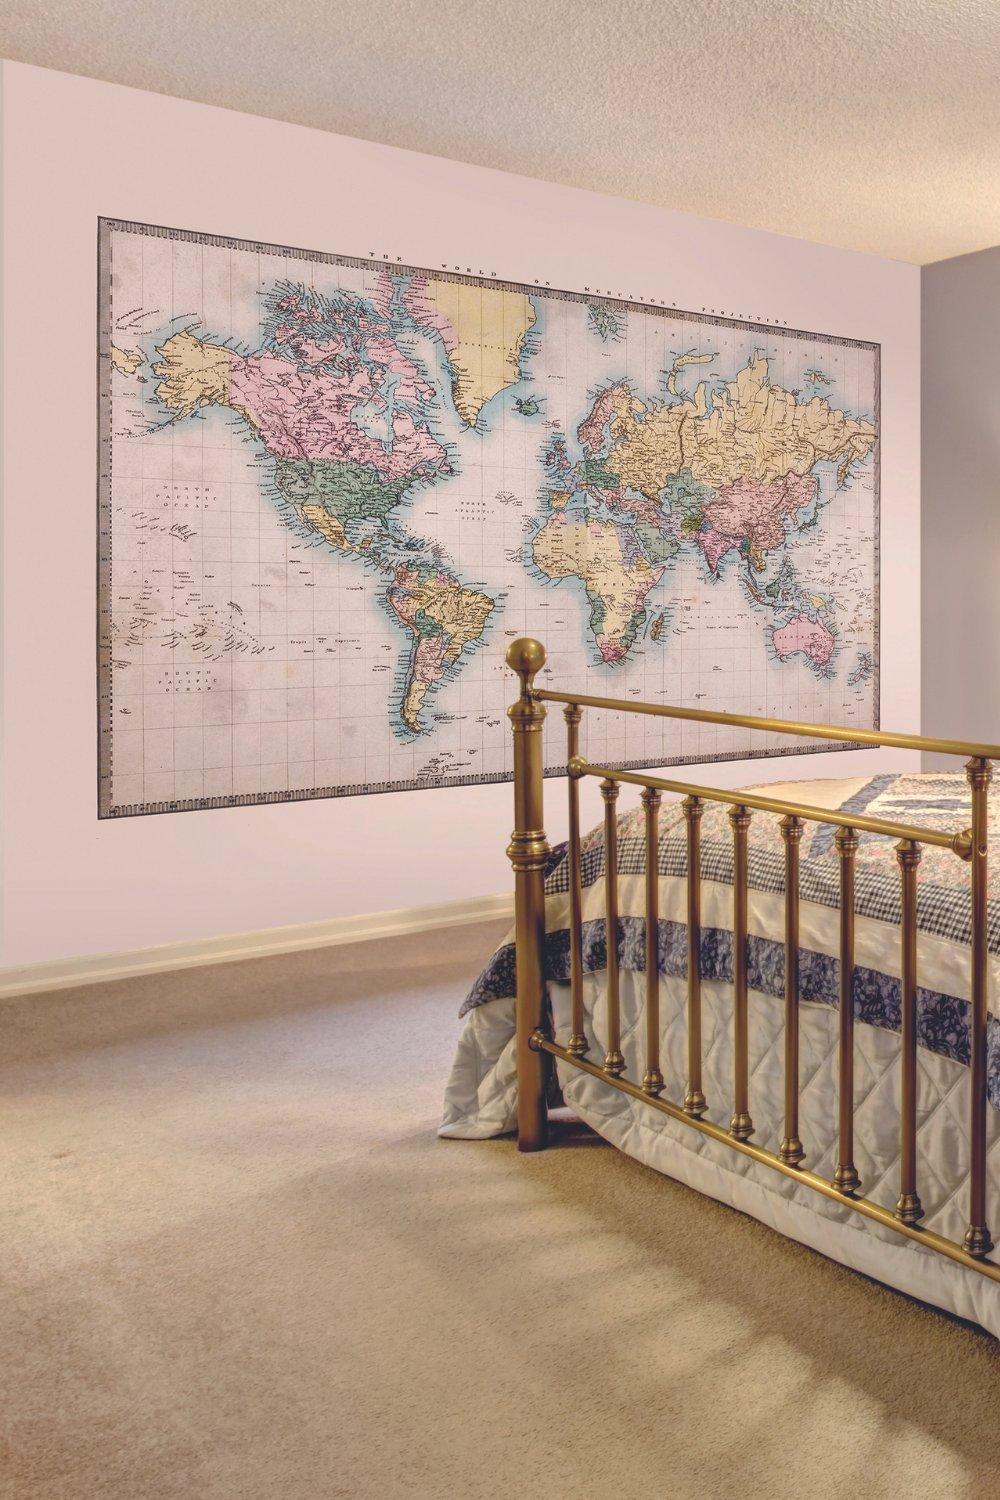 Historic World Map Natural Matt Smooth Paste the Wall Mural 350cm wide x 280cm high